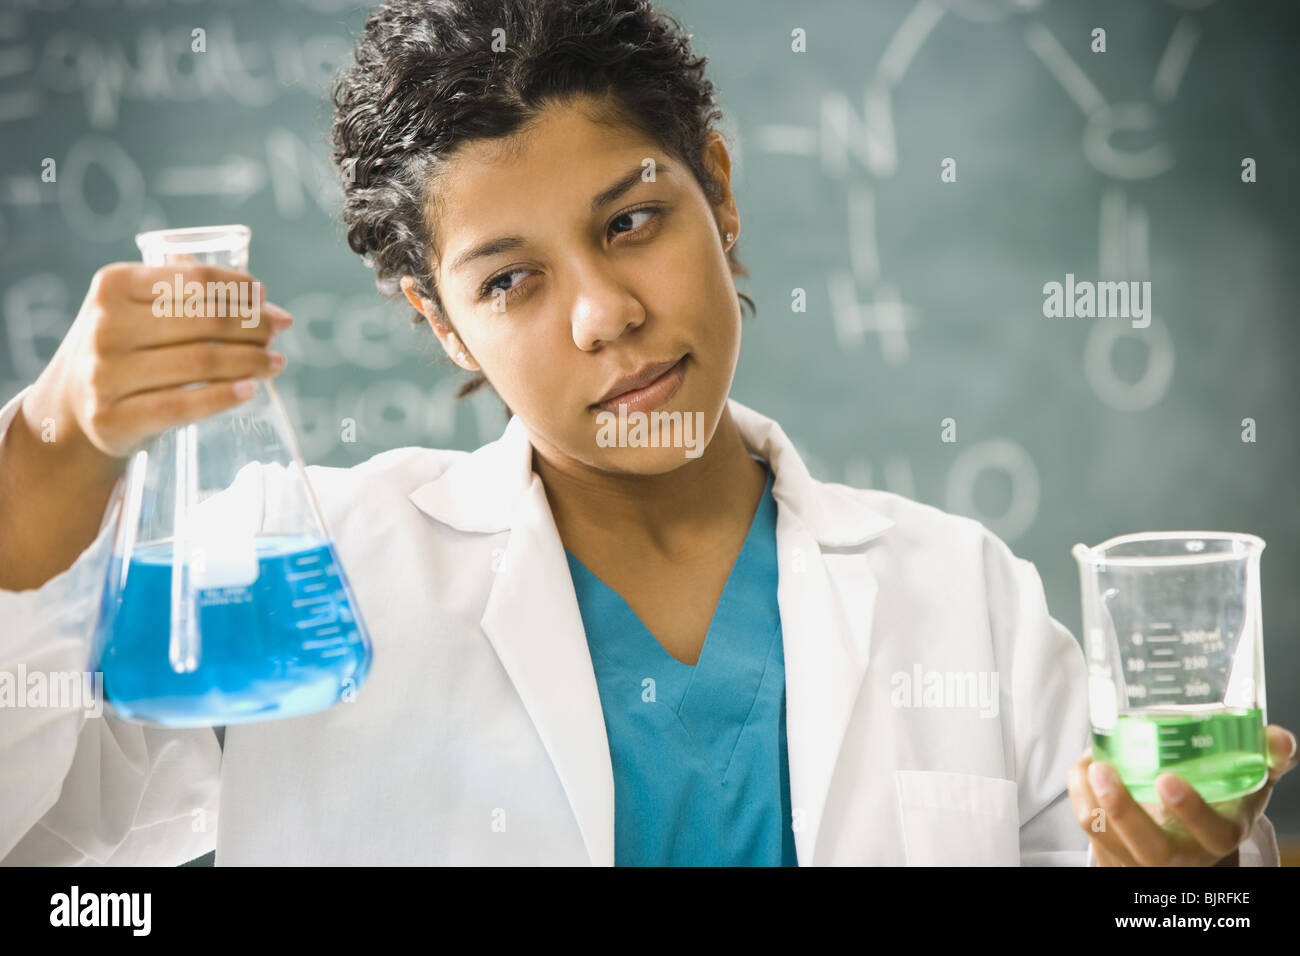 Scientist mixing chemicals Stock Photo